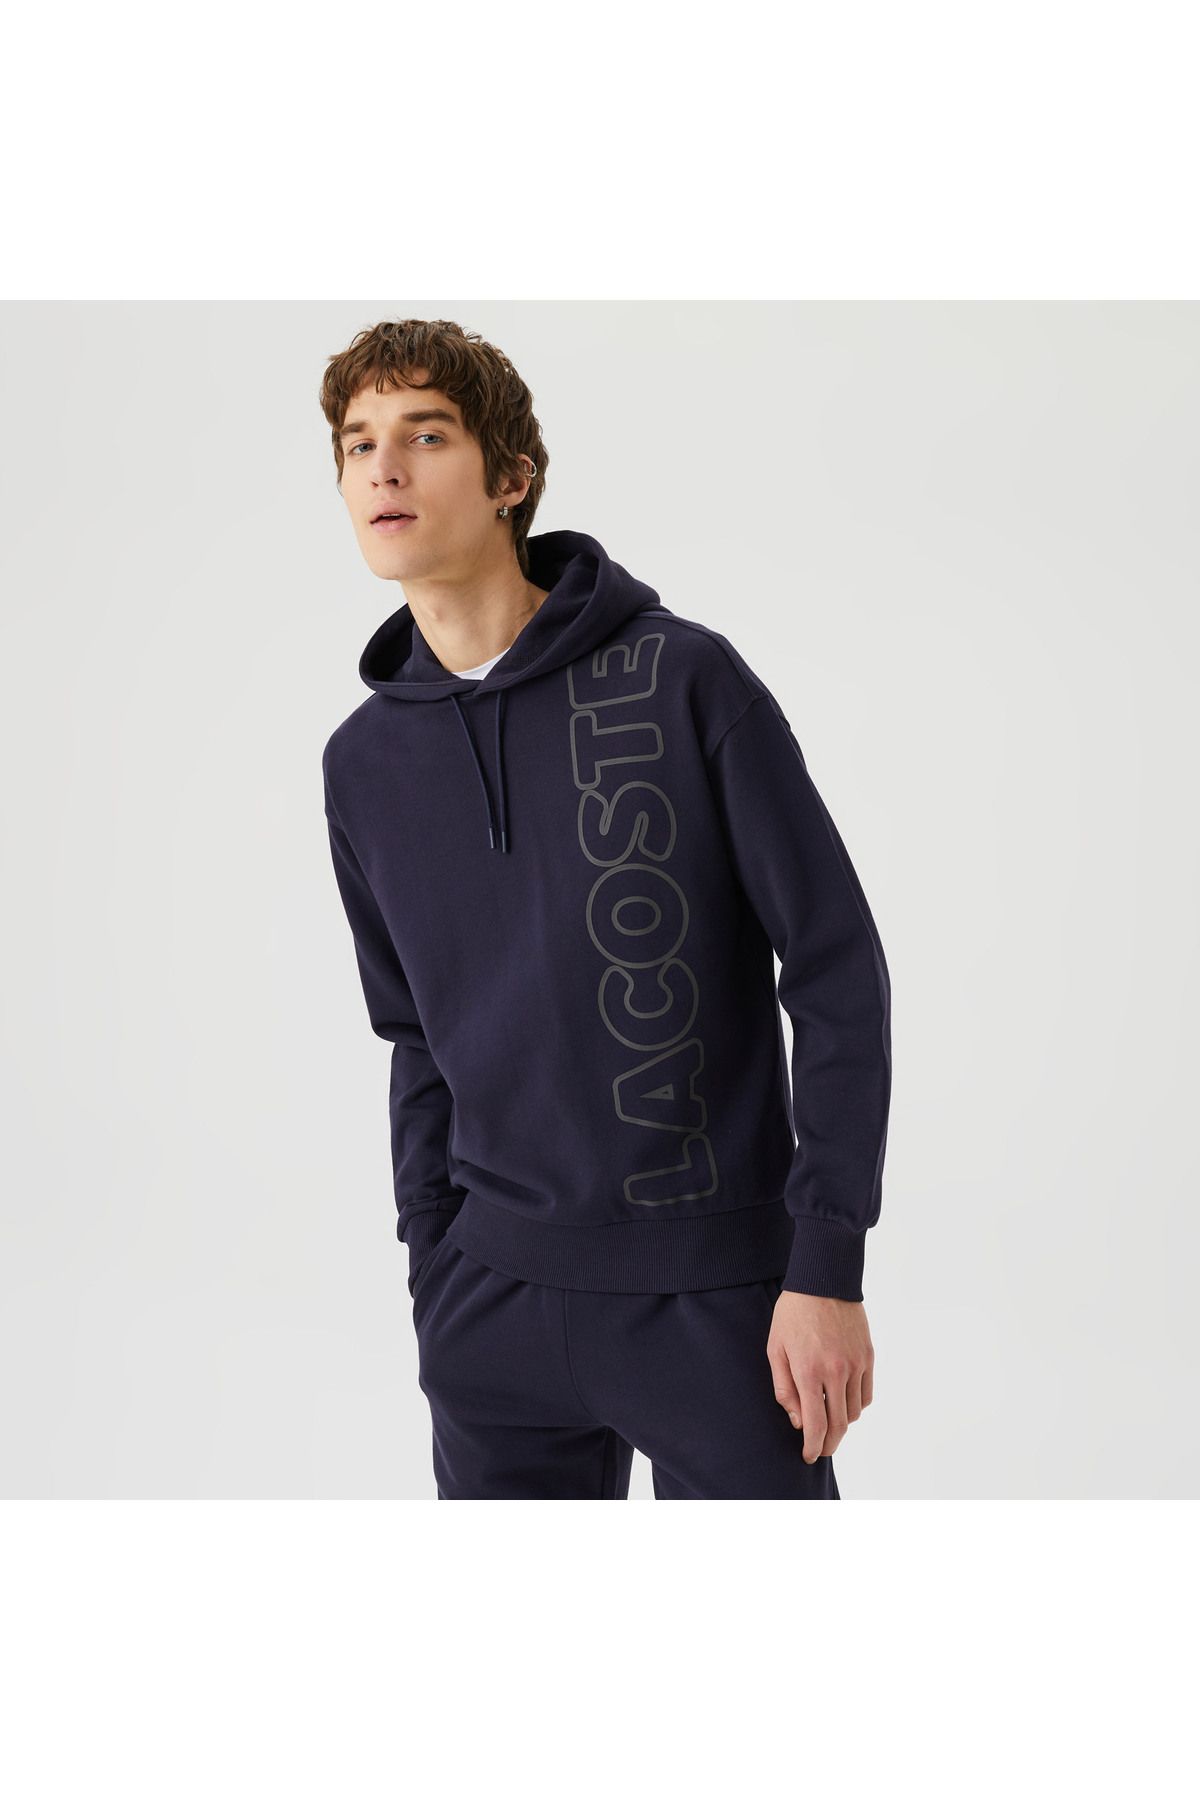 Lacoste Unisex Relax Fit Hooded Printed Blue Sweatryrt